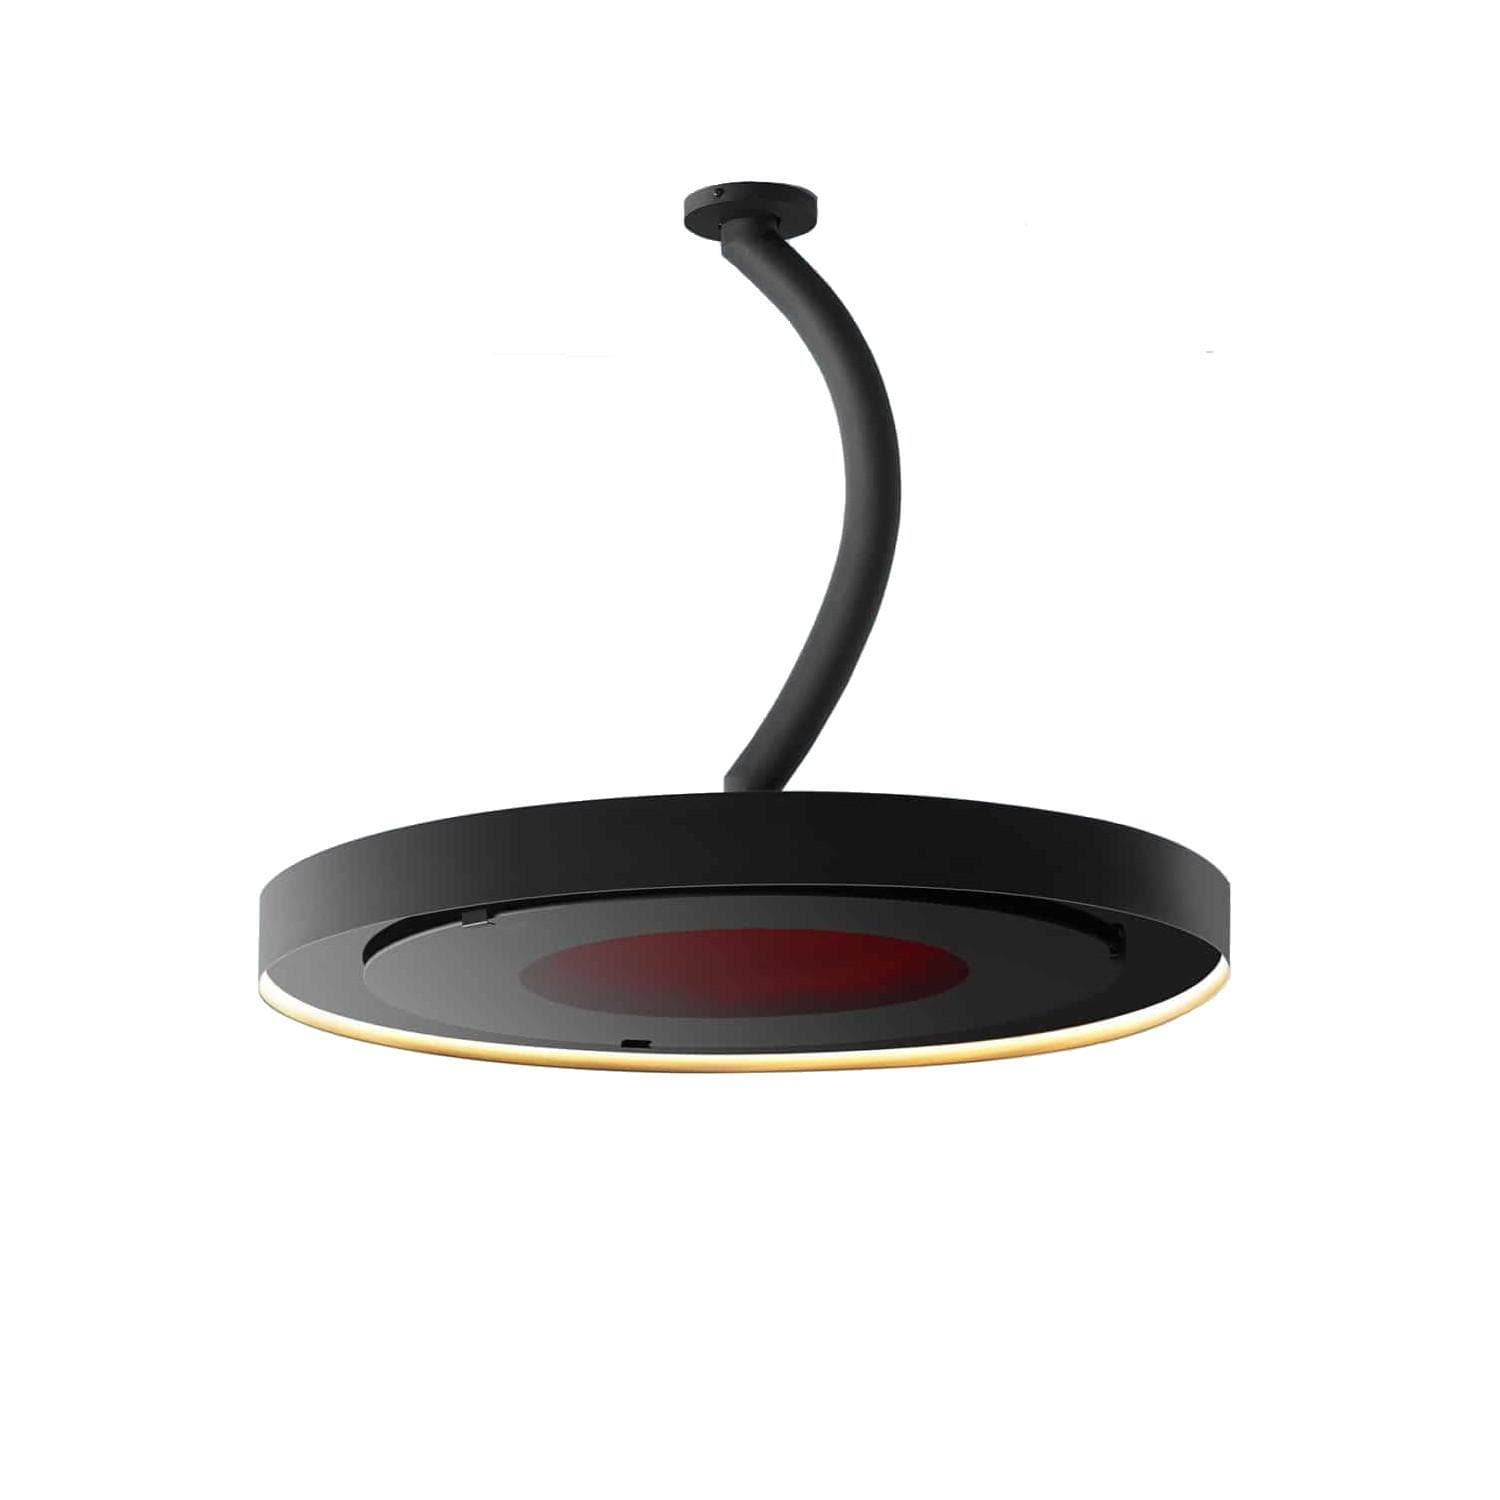 Bromic Heating - Eclipse 24-Inch Curved Ceiling Pole - BH3230004